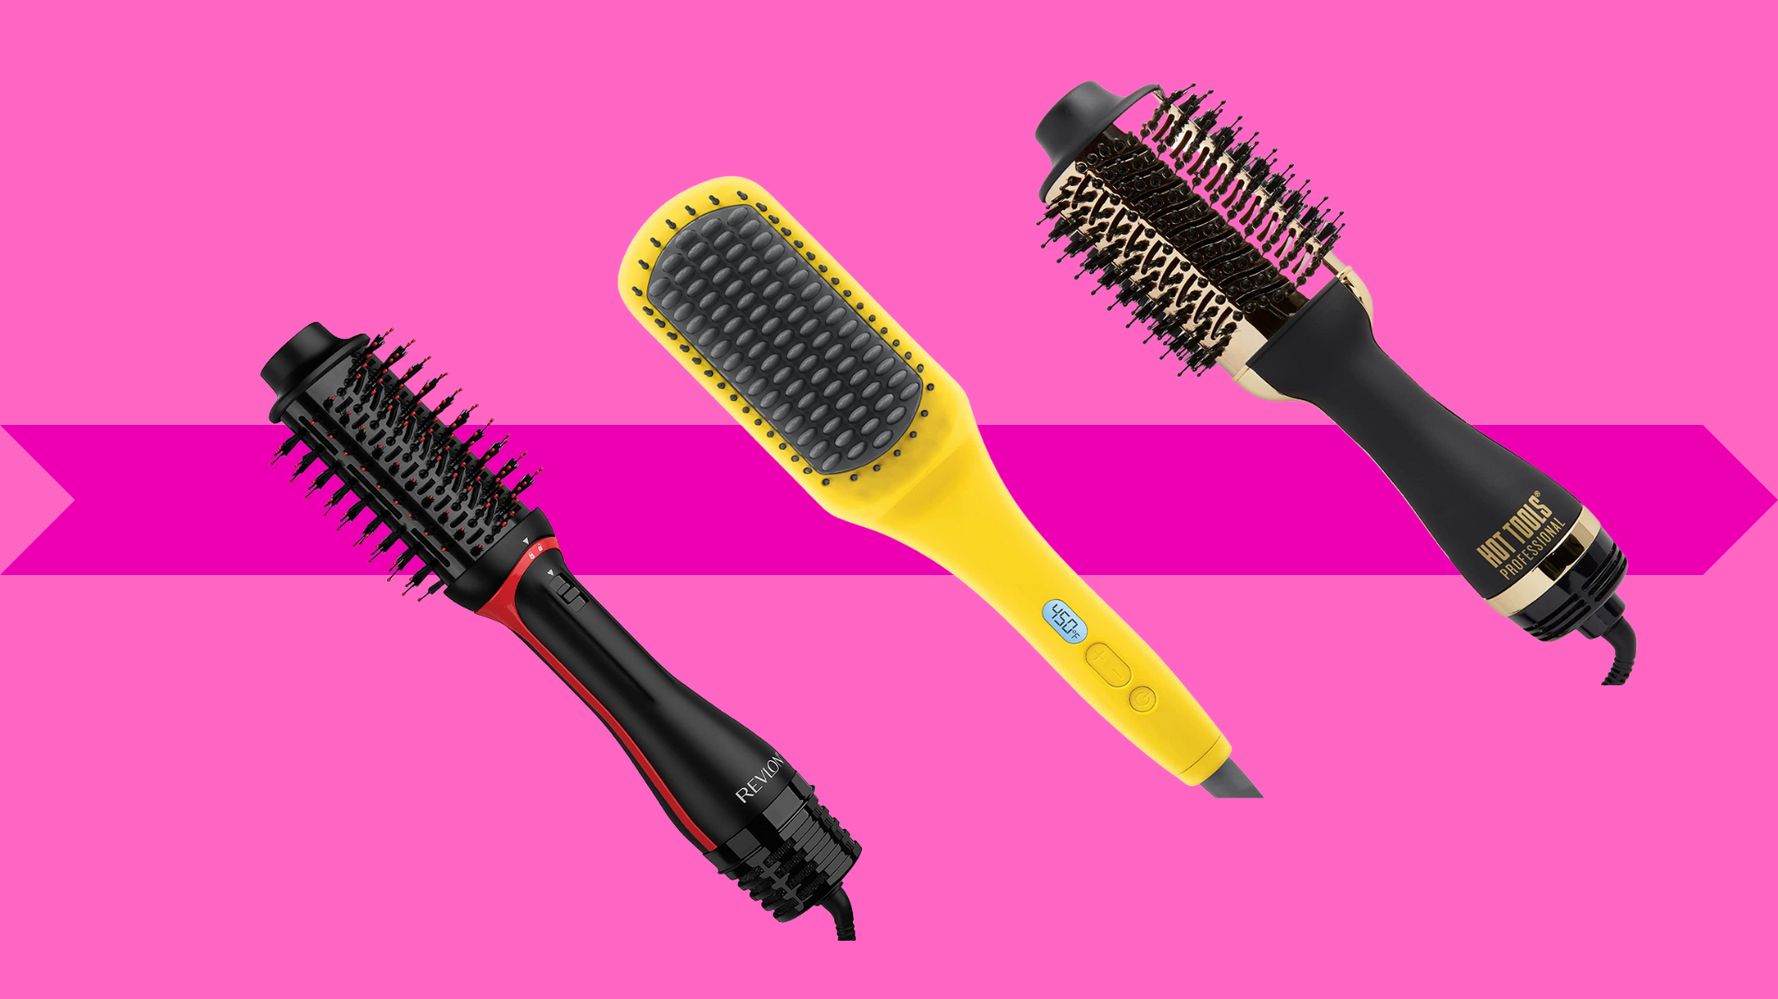 This Popular Revlon Hair Tool Is on Sale for $25 for Prime Day